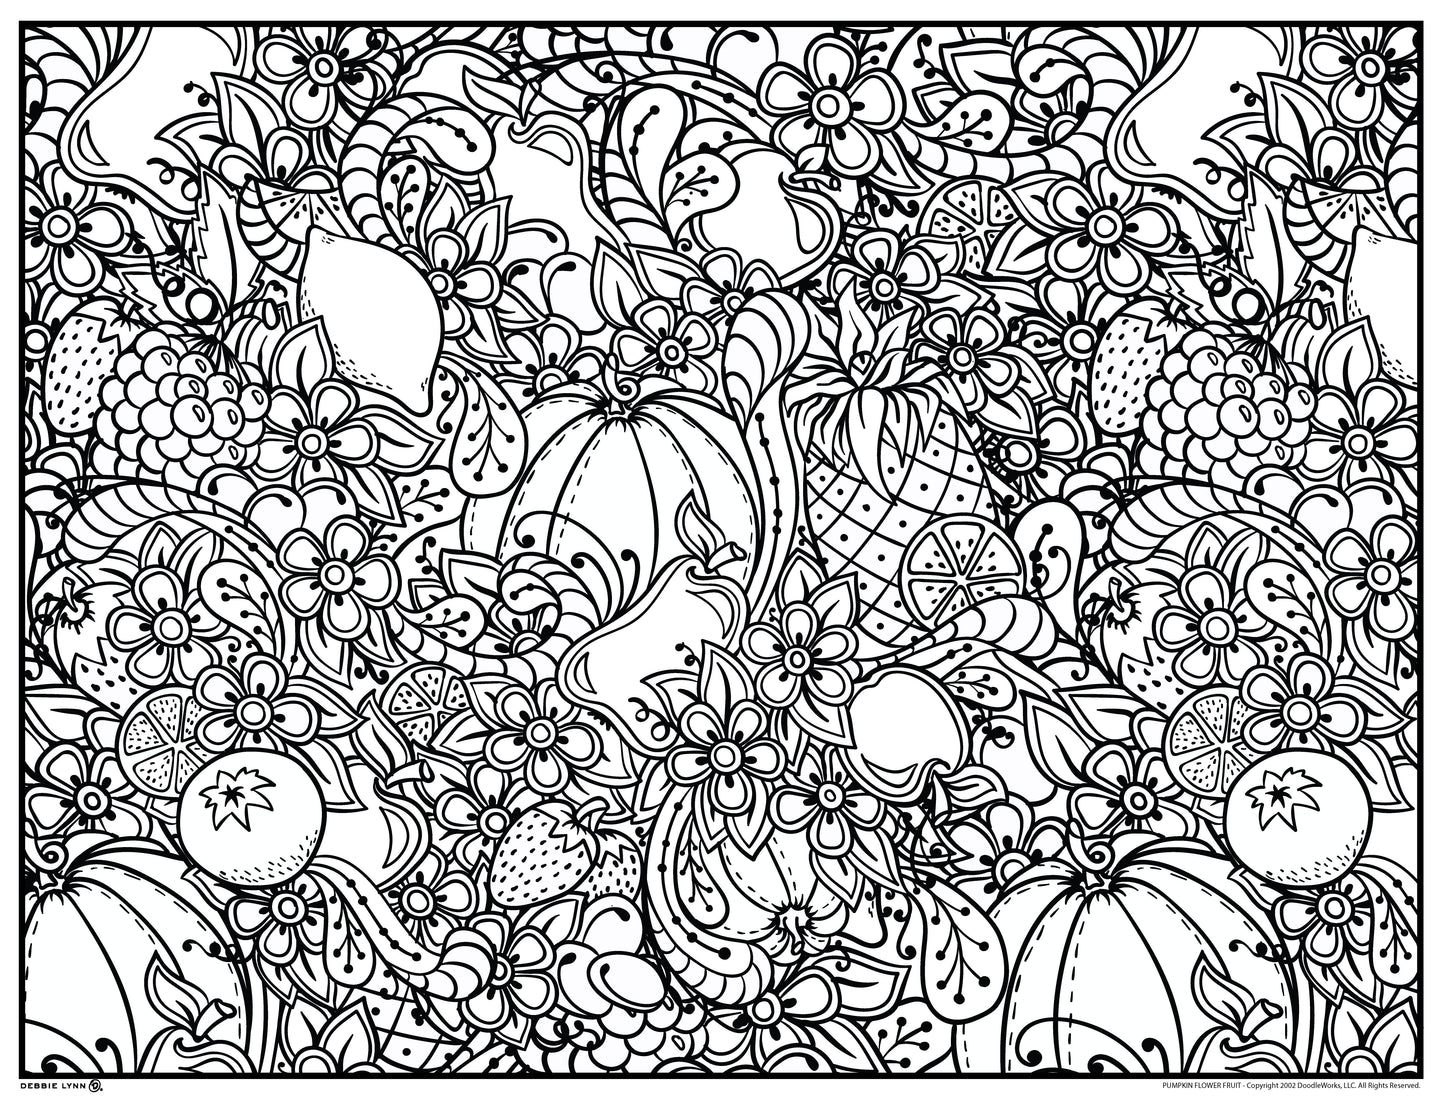 Pumpkin Flower Fruit Personalized Giant Coloring Poster 46"x60"